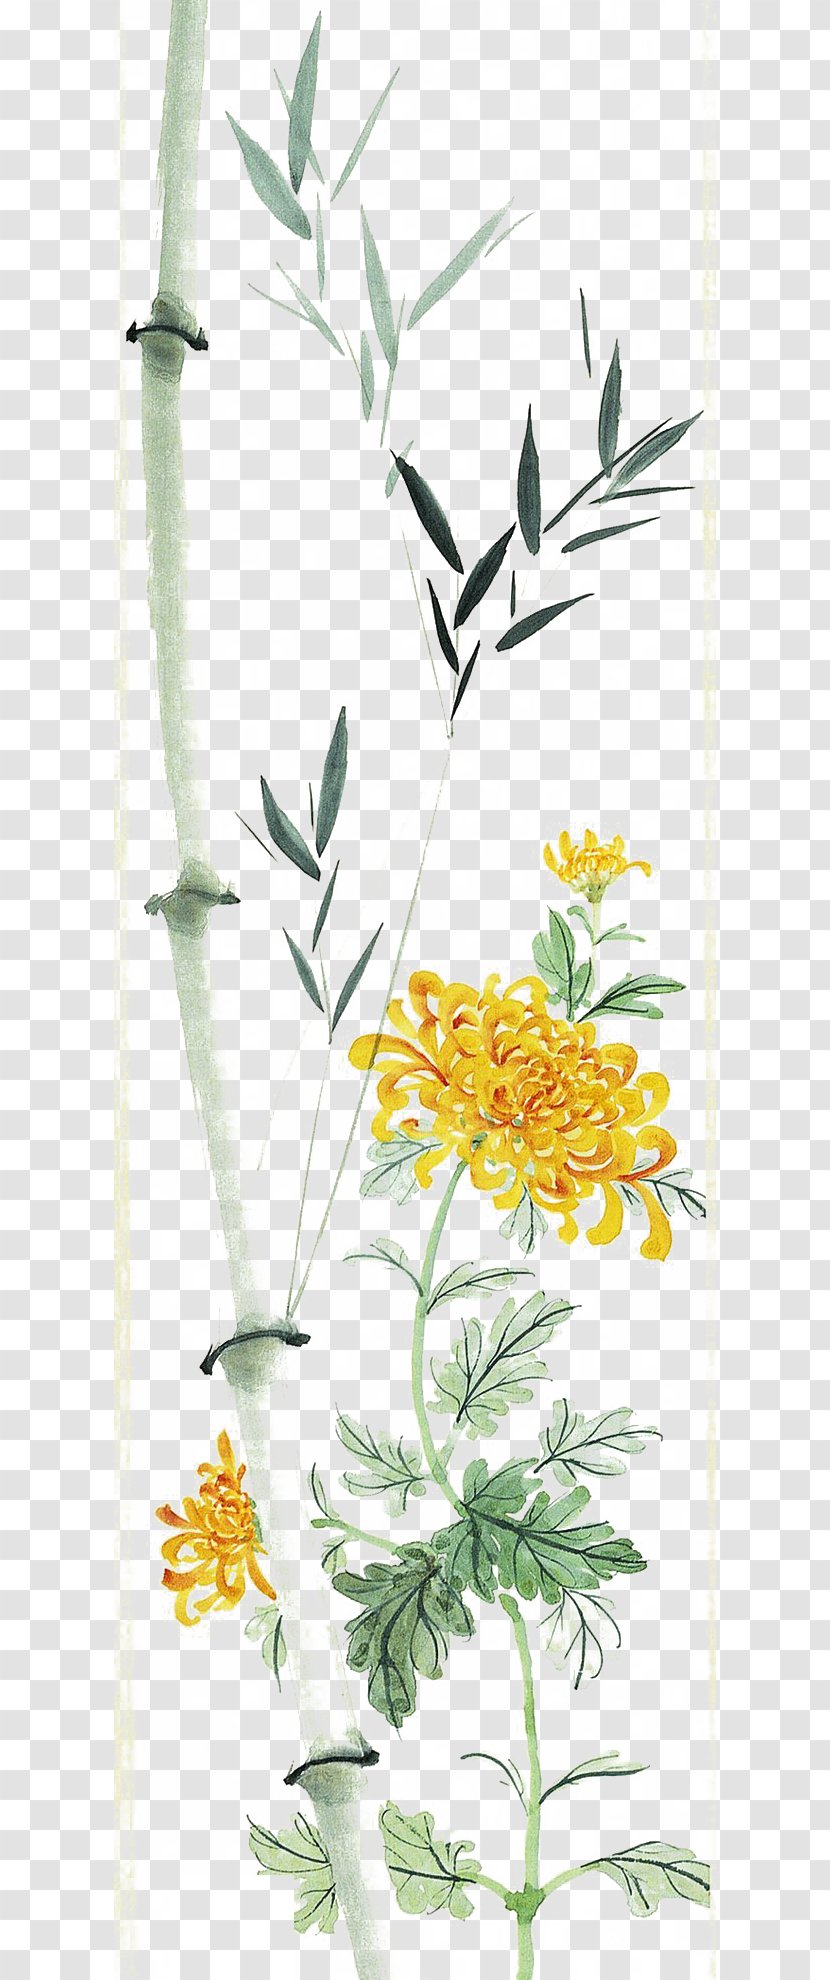 Chrysanthemum Bamboo Chinese Painting Leaf - Plant Stem - Leaves And Chrysanthemums Transparent PNG